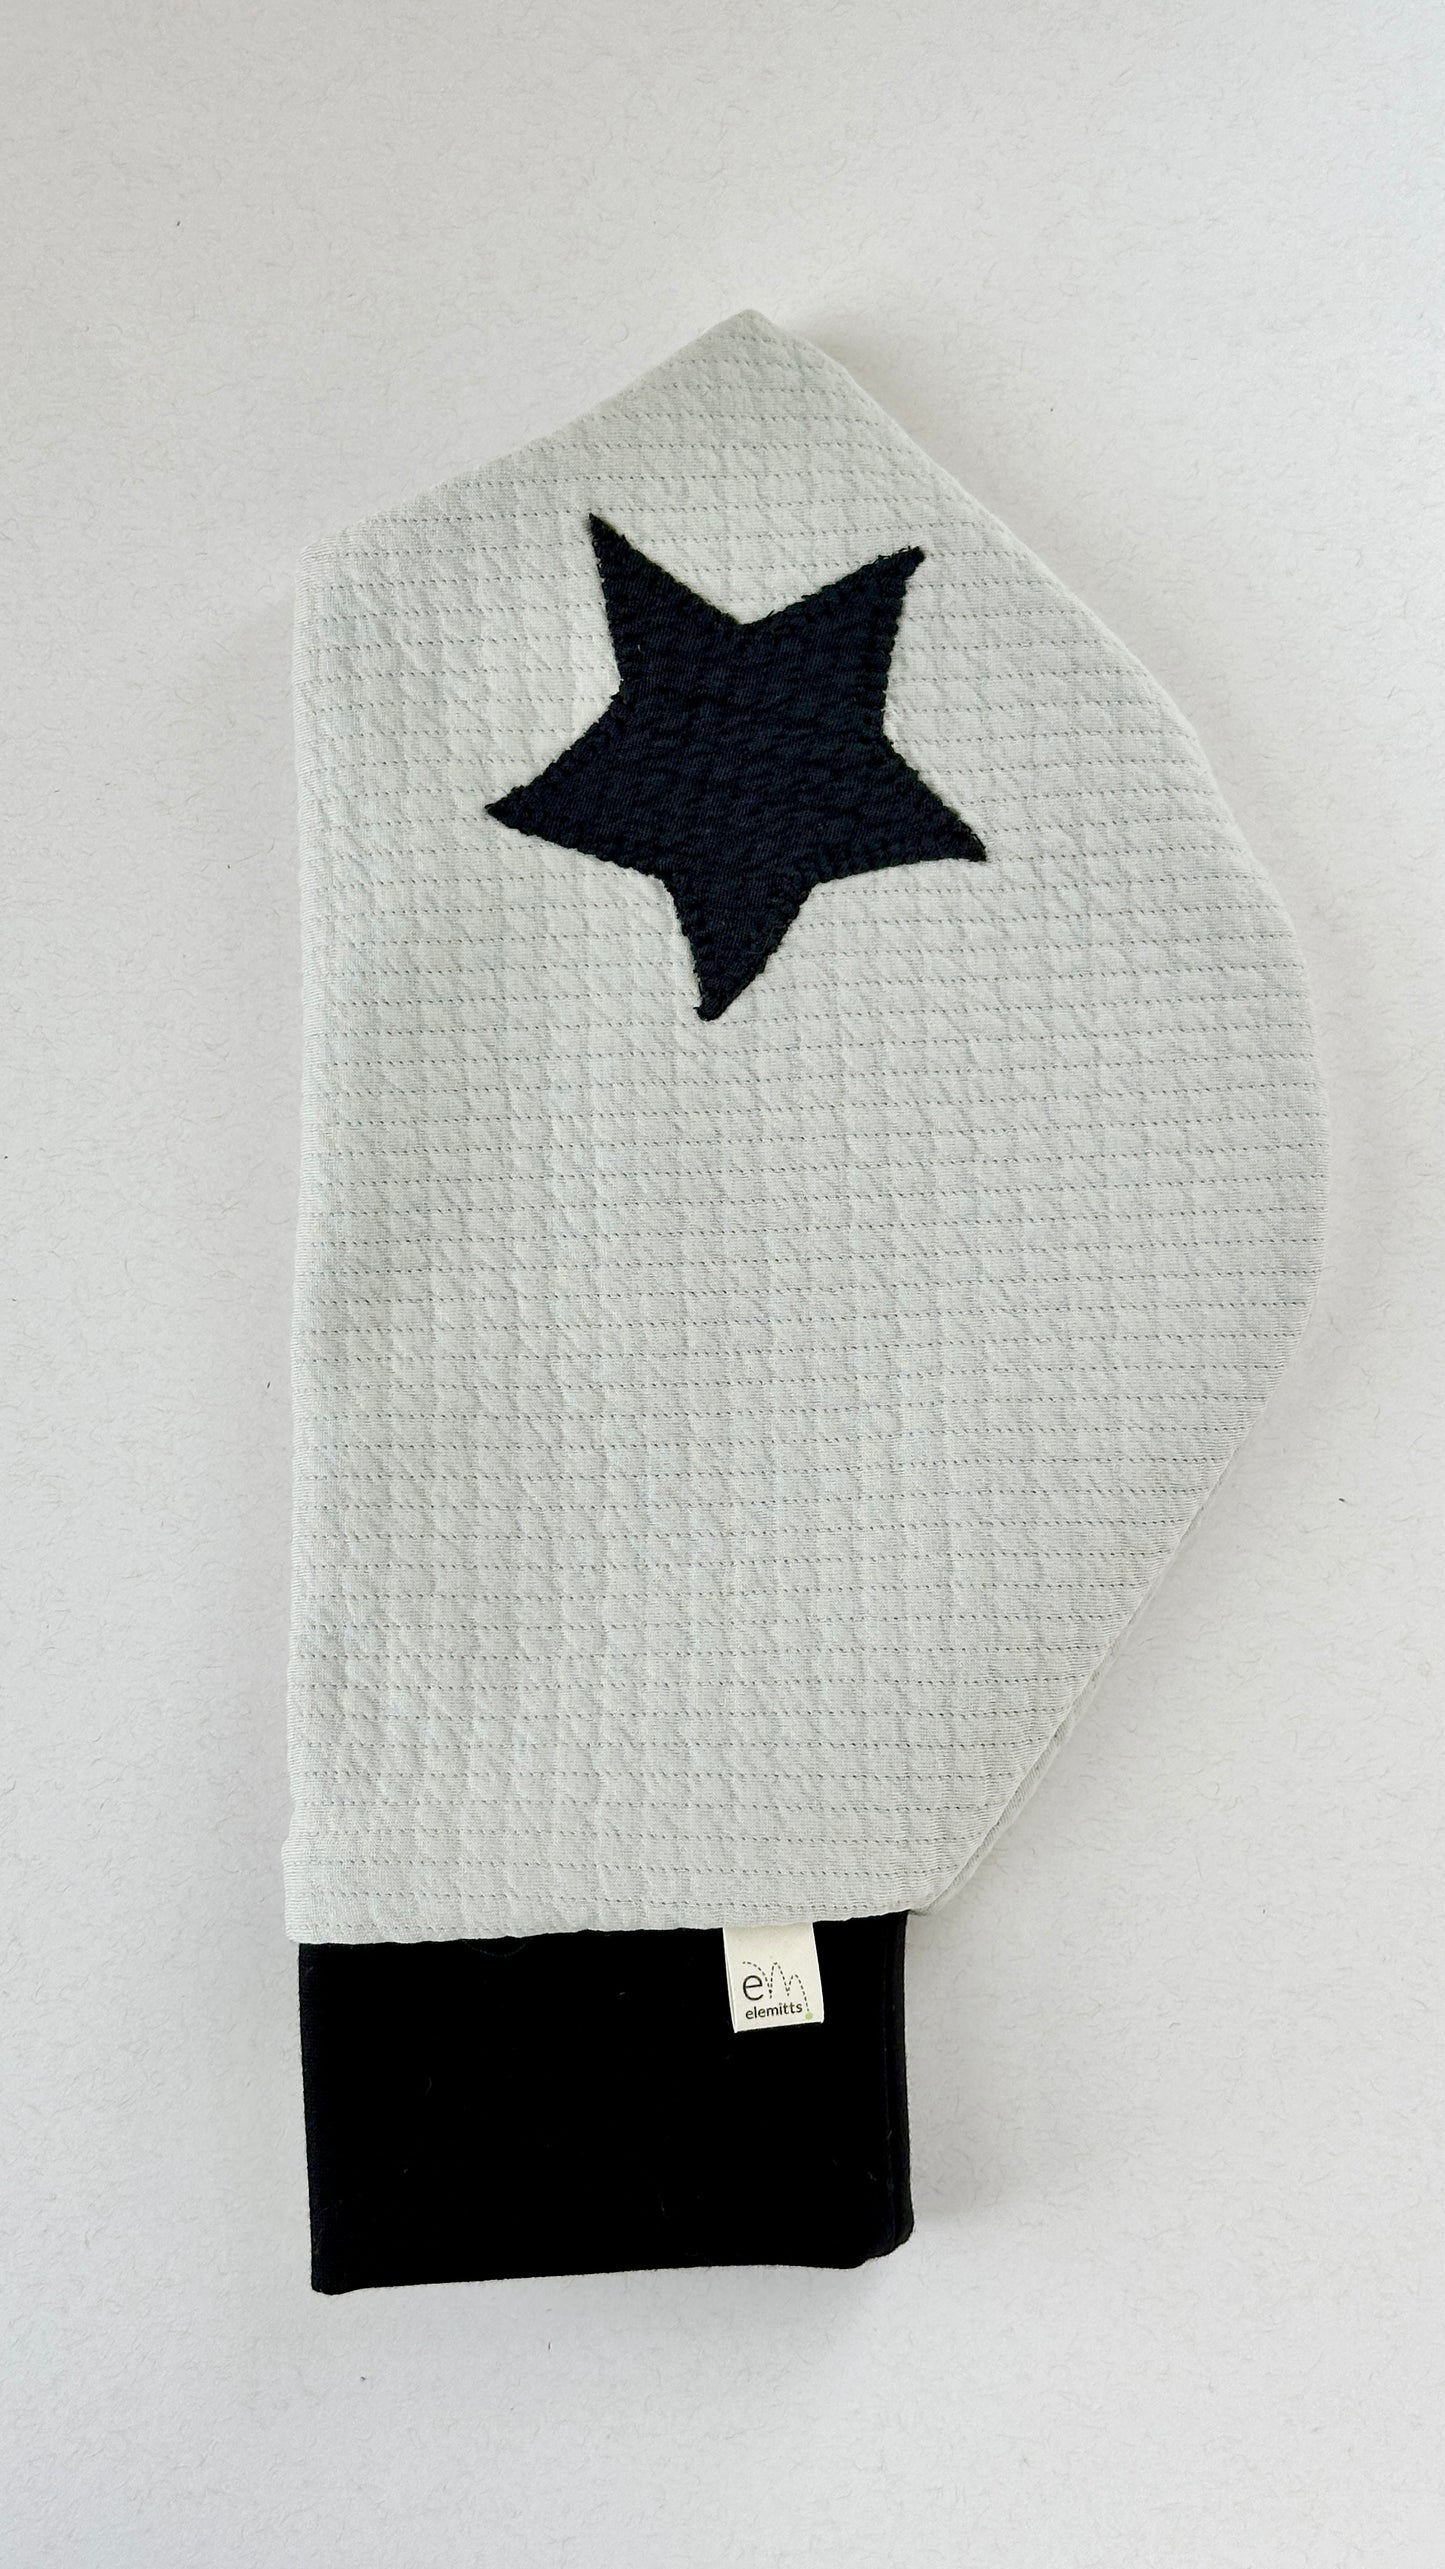 The quilted puff paddle tennis mitt